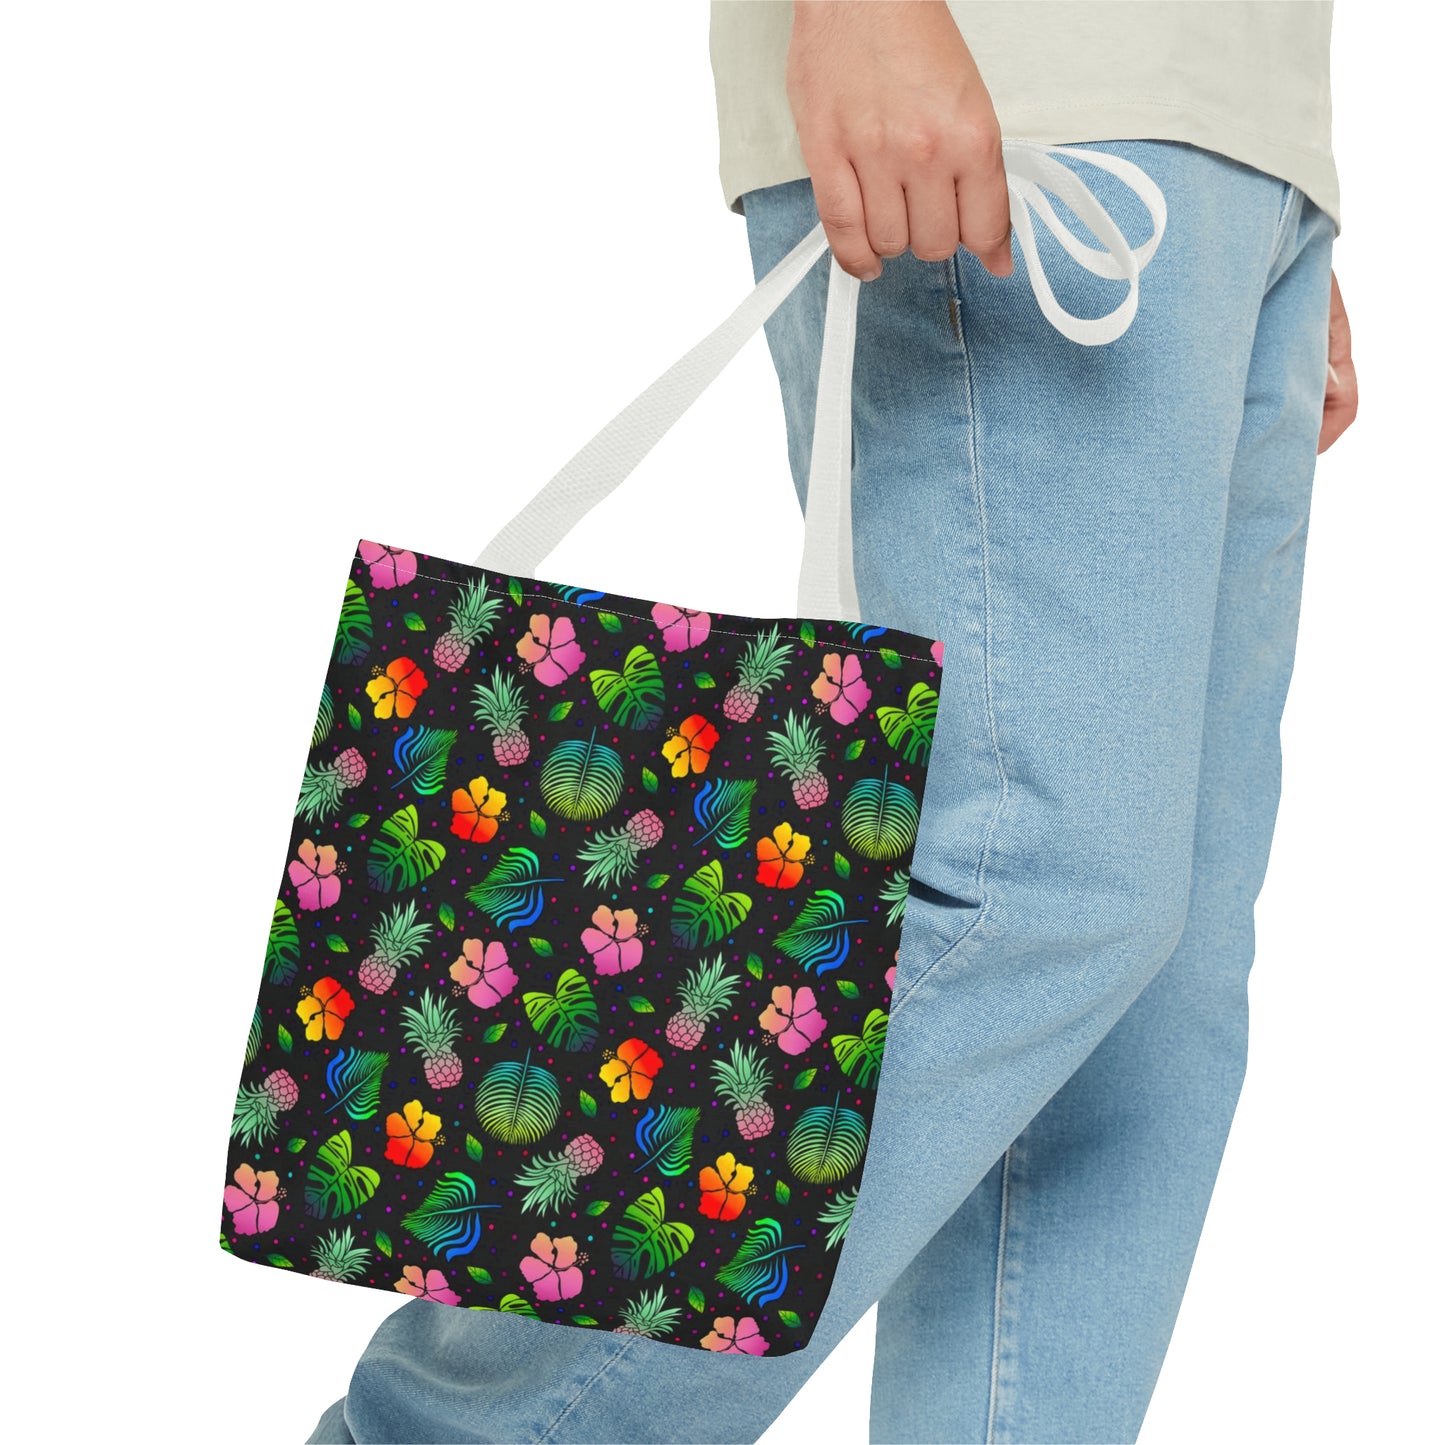 Pineapple Perfection Tote Bag